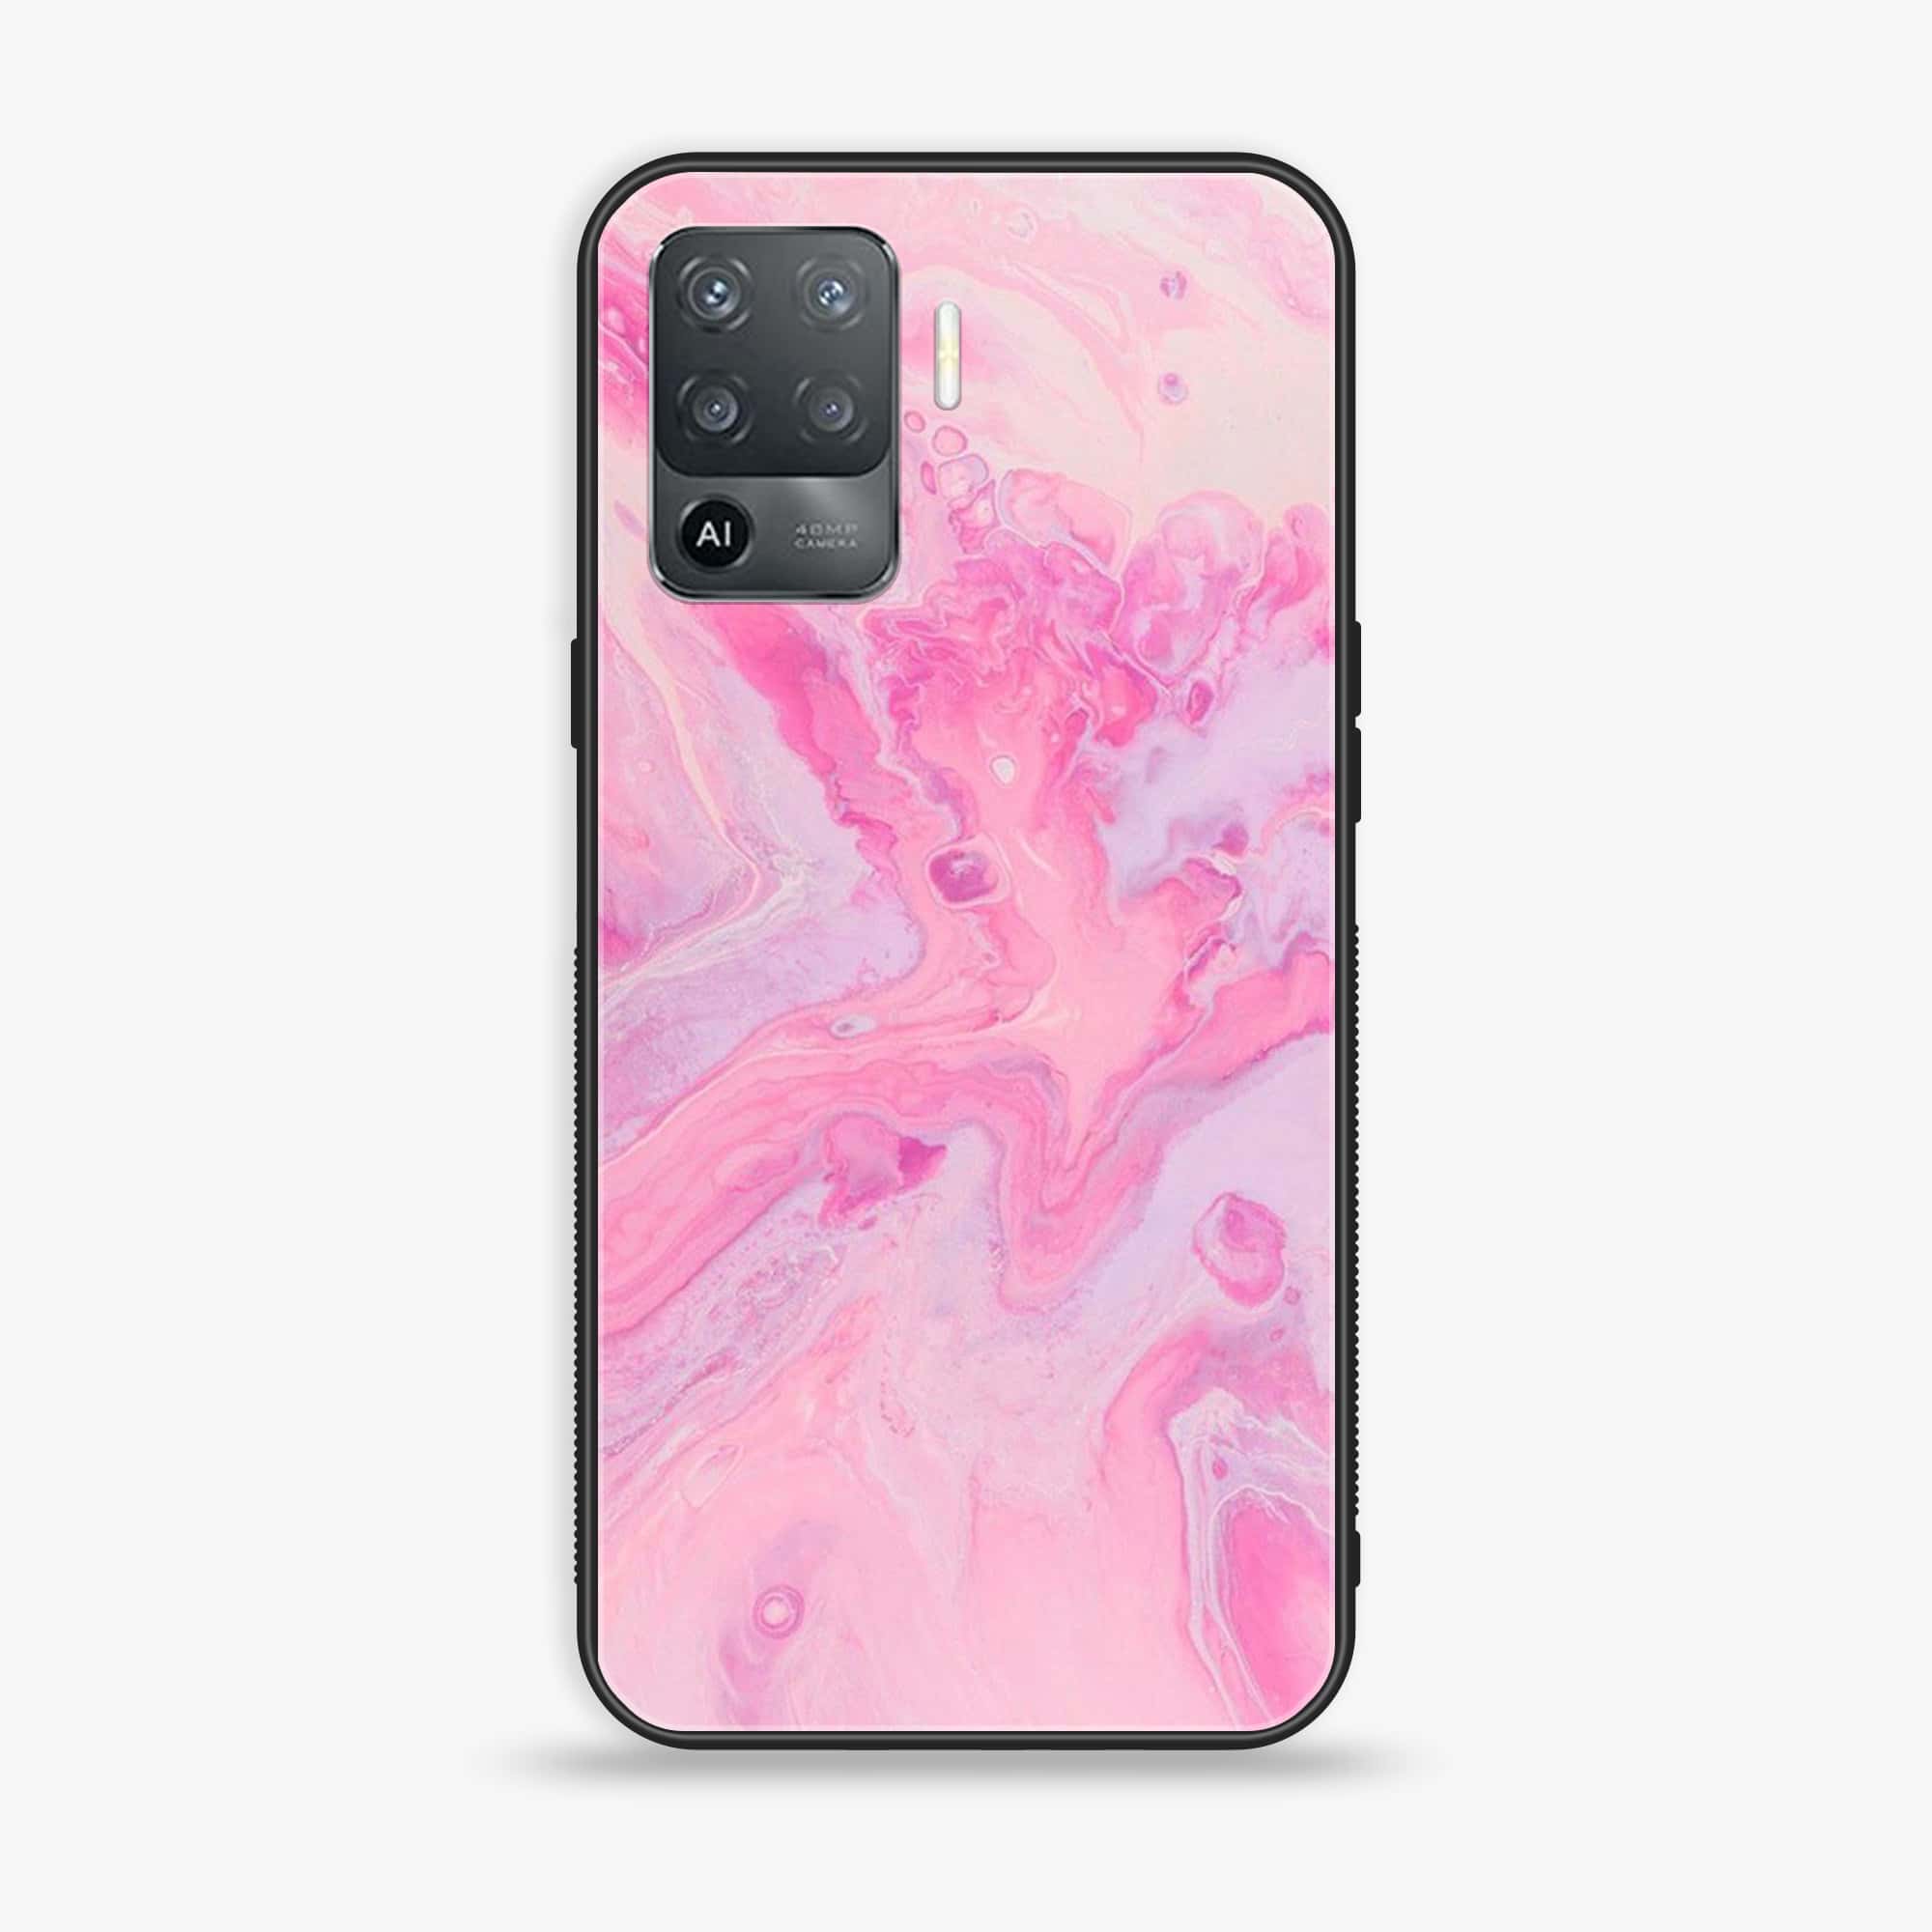 Oppo F19 Pro - Pink Marble Series - Premium Printed Glass soft Bumper shock Proof Case